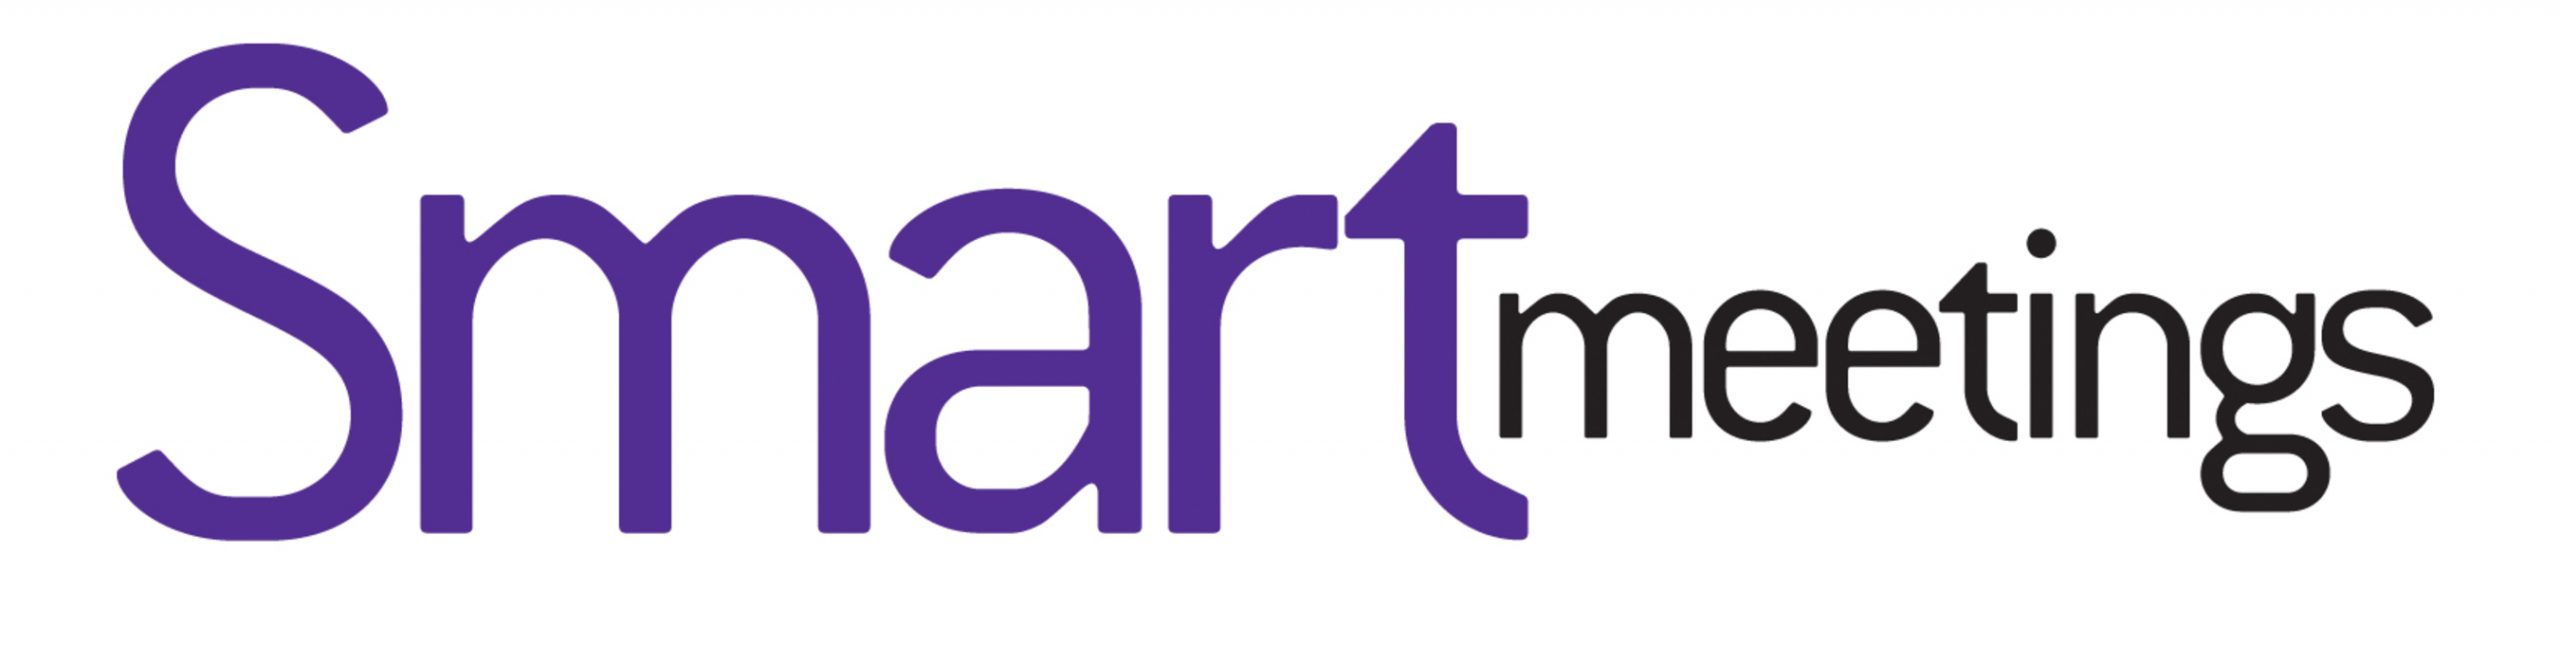 Smart meetings logo on a white background.